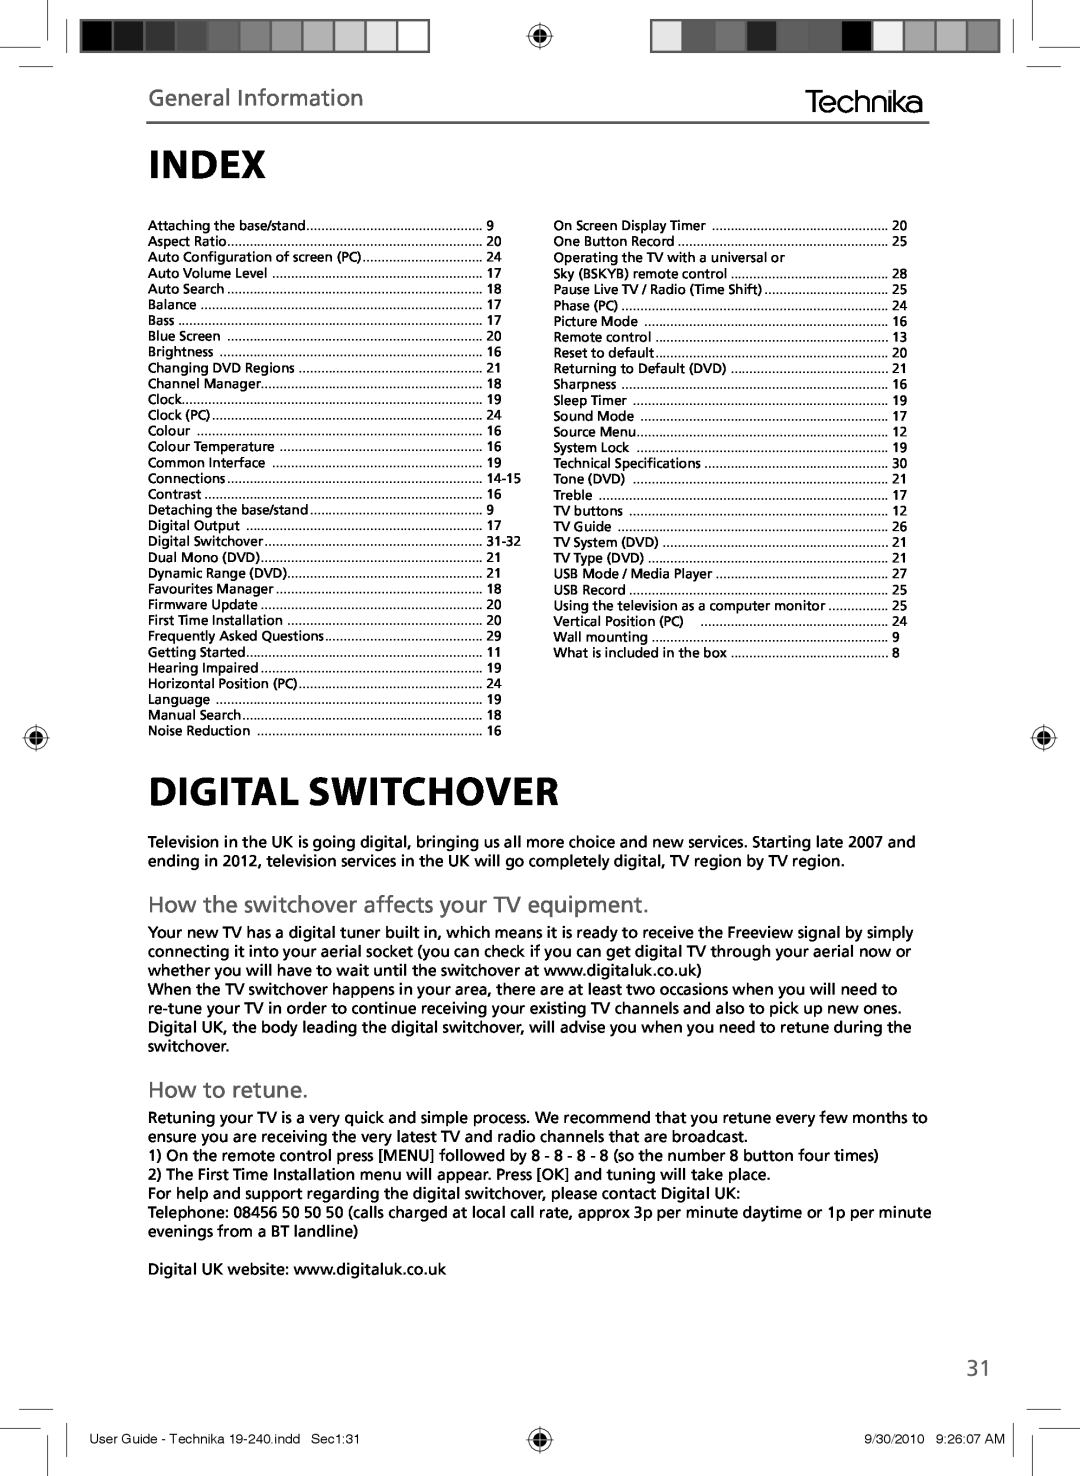 Technika LCD 19-240 manual Index, Digital Switchover, How the switchover affects your TV equipment, How to retune 